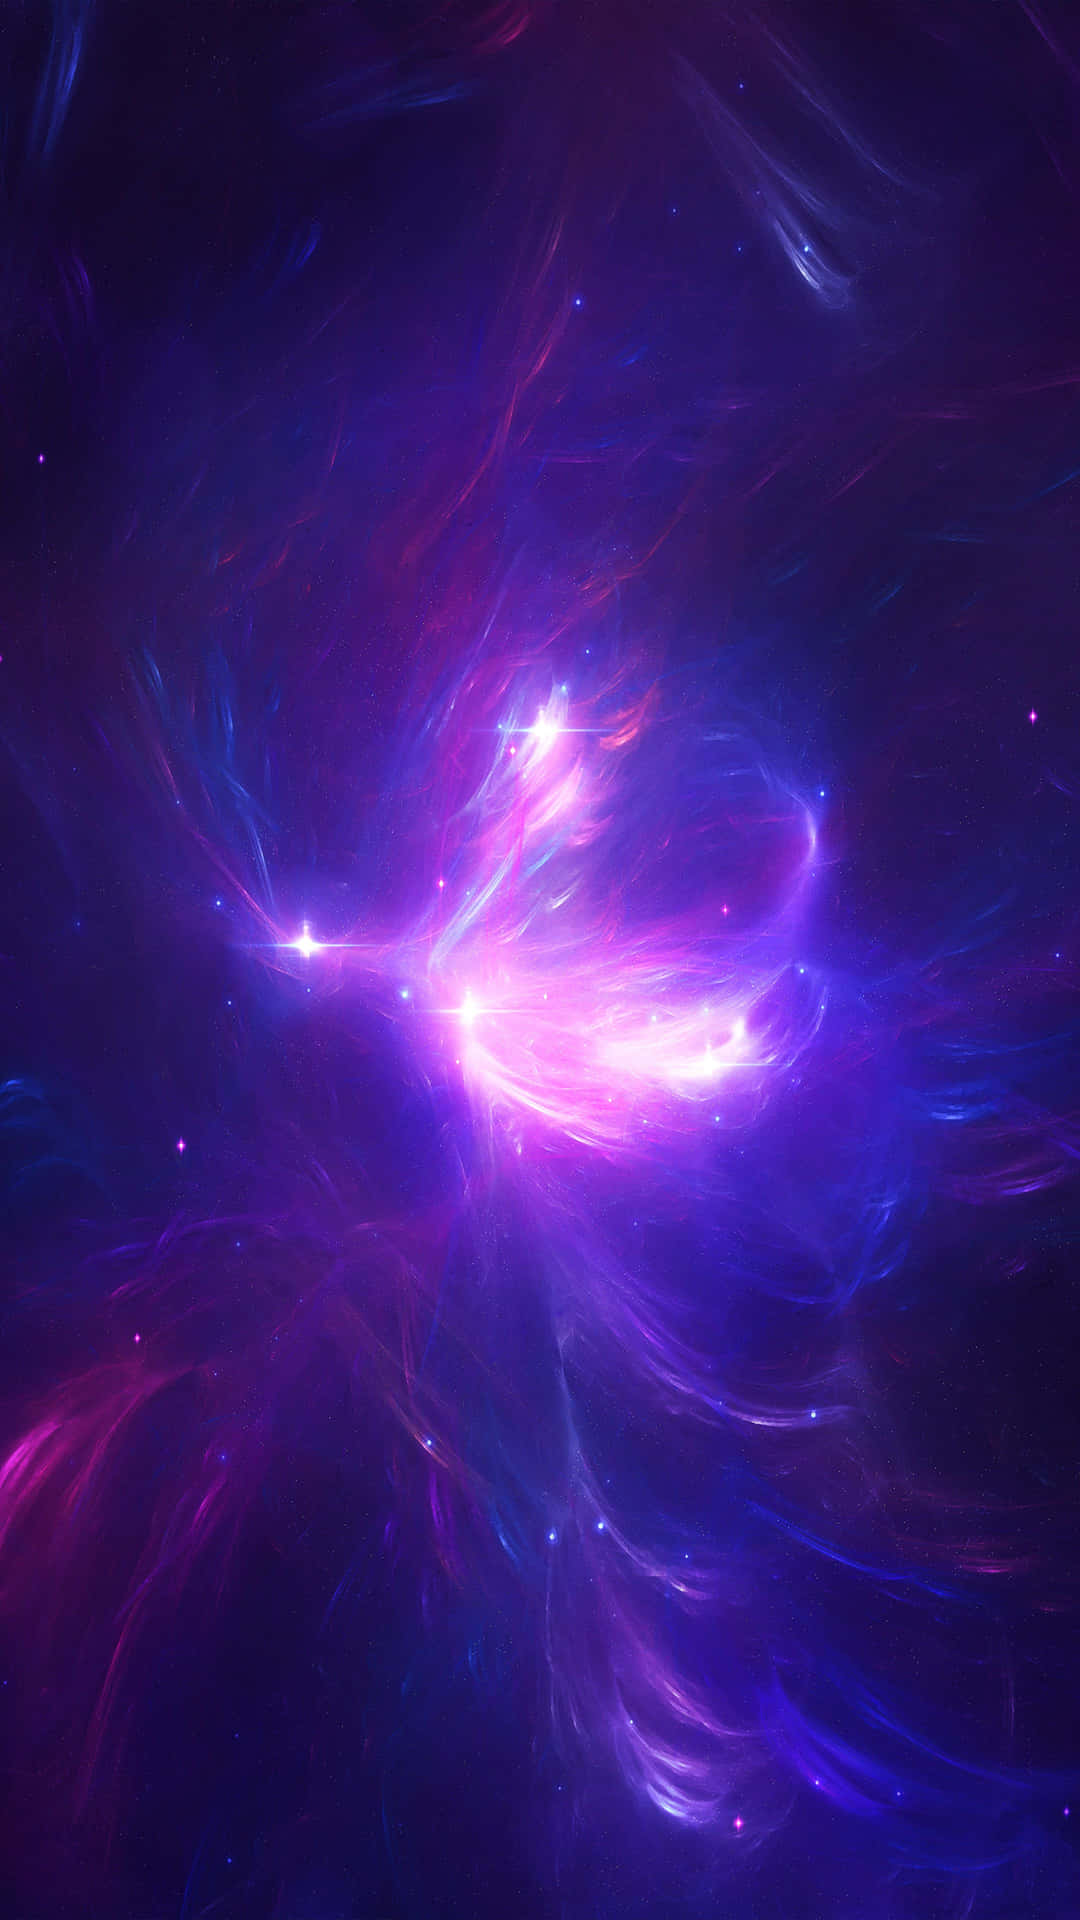 Get your hands on the beautiful Purple Phone Wallpaper